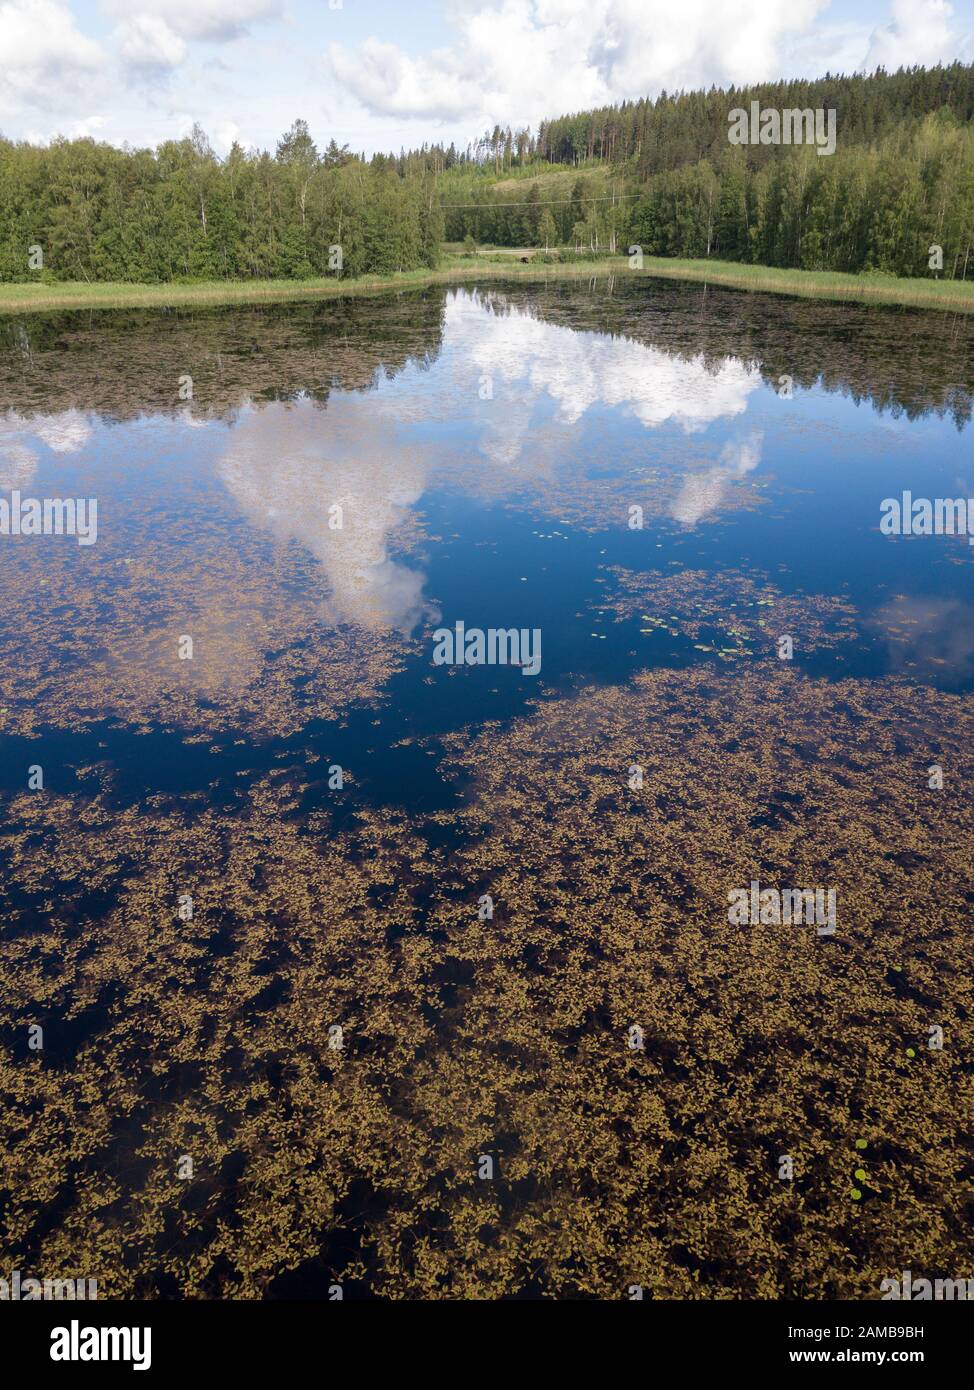 Calm lake with floating pondweed covering water surface Stock Photo